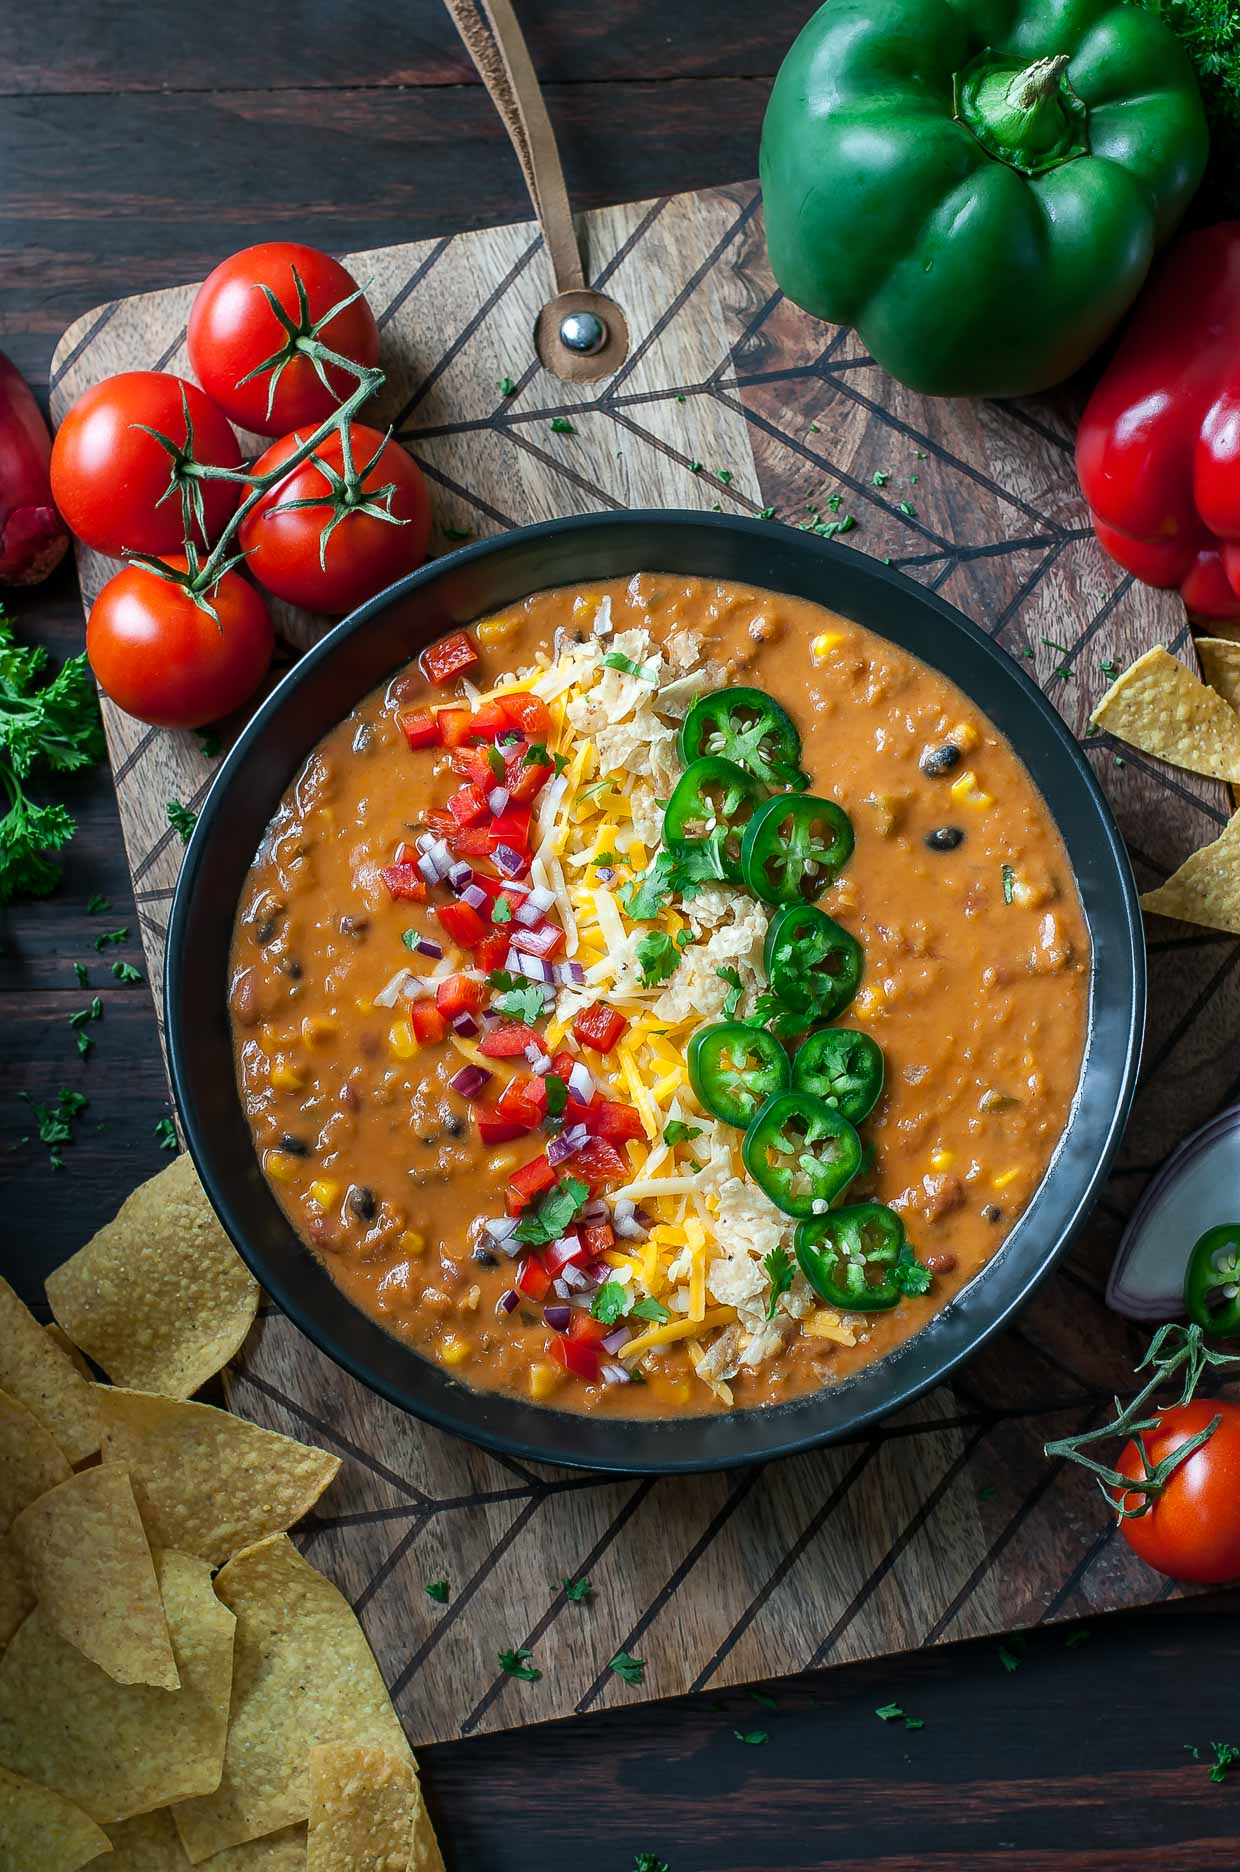 Try these healthy and delicious instant pot recipes for dairy free, gluten free, and even vegetarian meal cooked in no time at all!